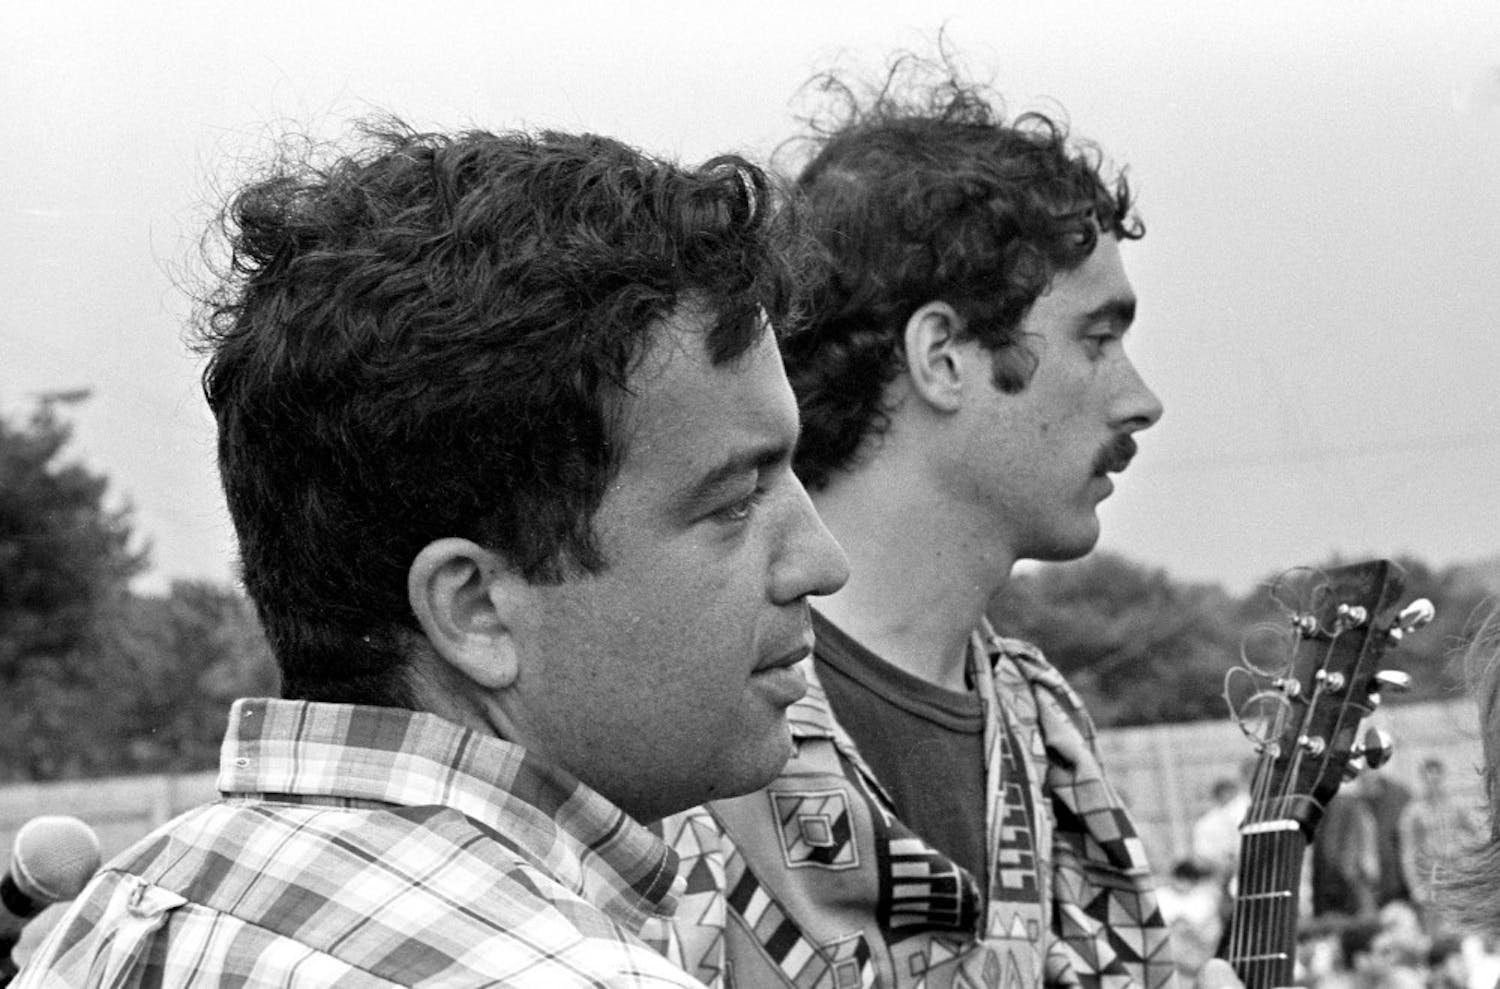 Professor Bruce Jackson (left) chats with Jim Kweskin (right) at the 1967 Newport Folk Festival. Jackson was on the festival board from 1965 to 1968. He claims that fans didn’t boo Bob Dylan during his infamous 1965 festival performance.